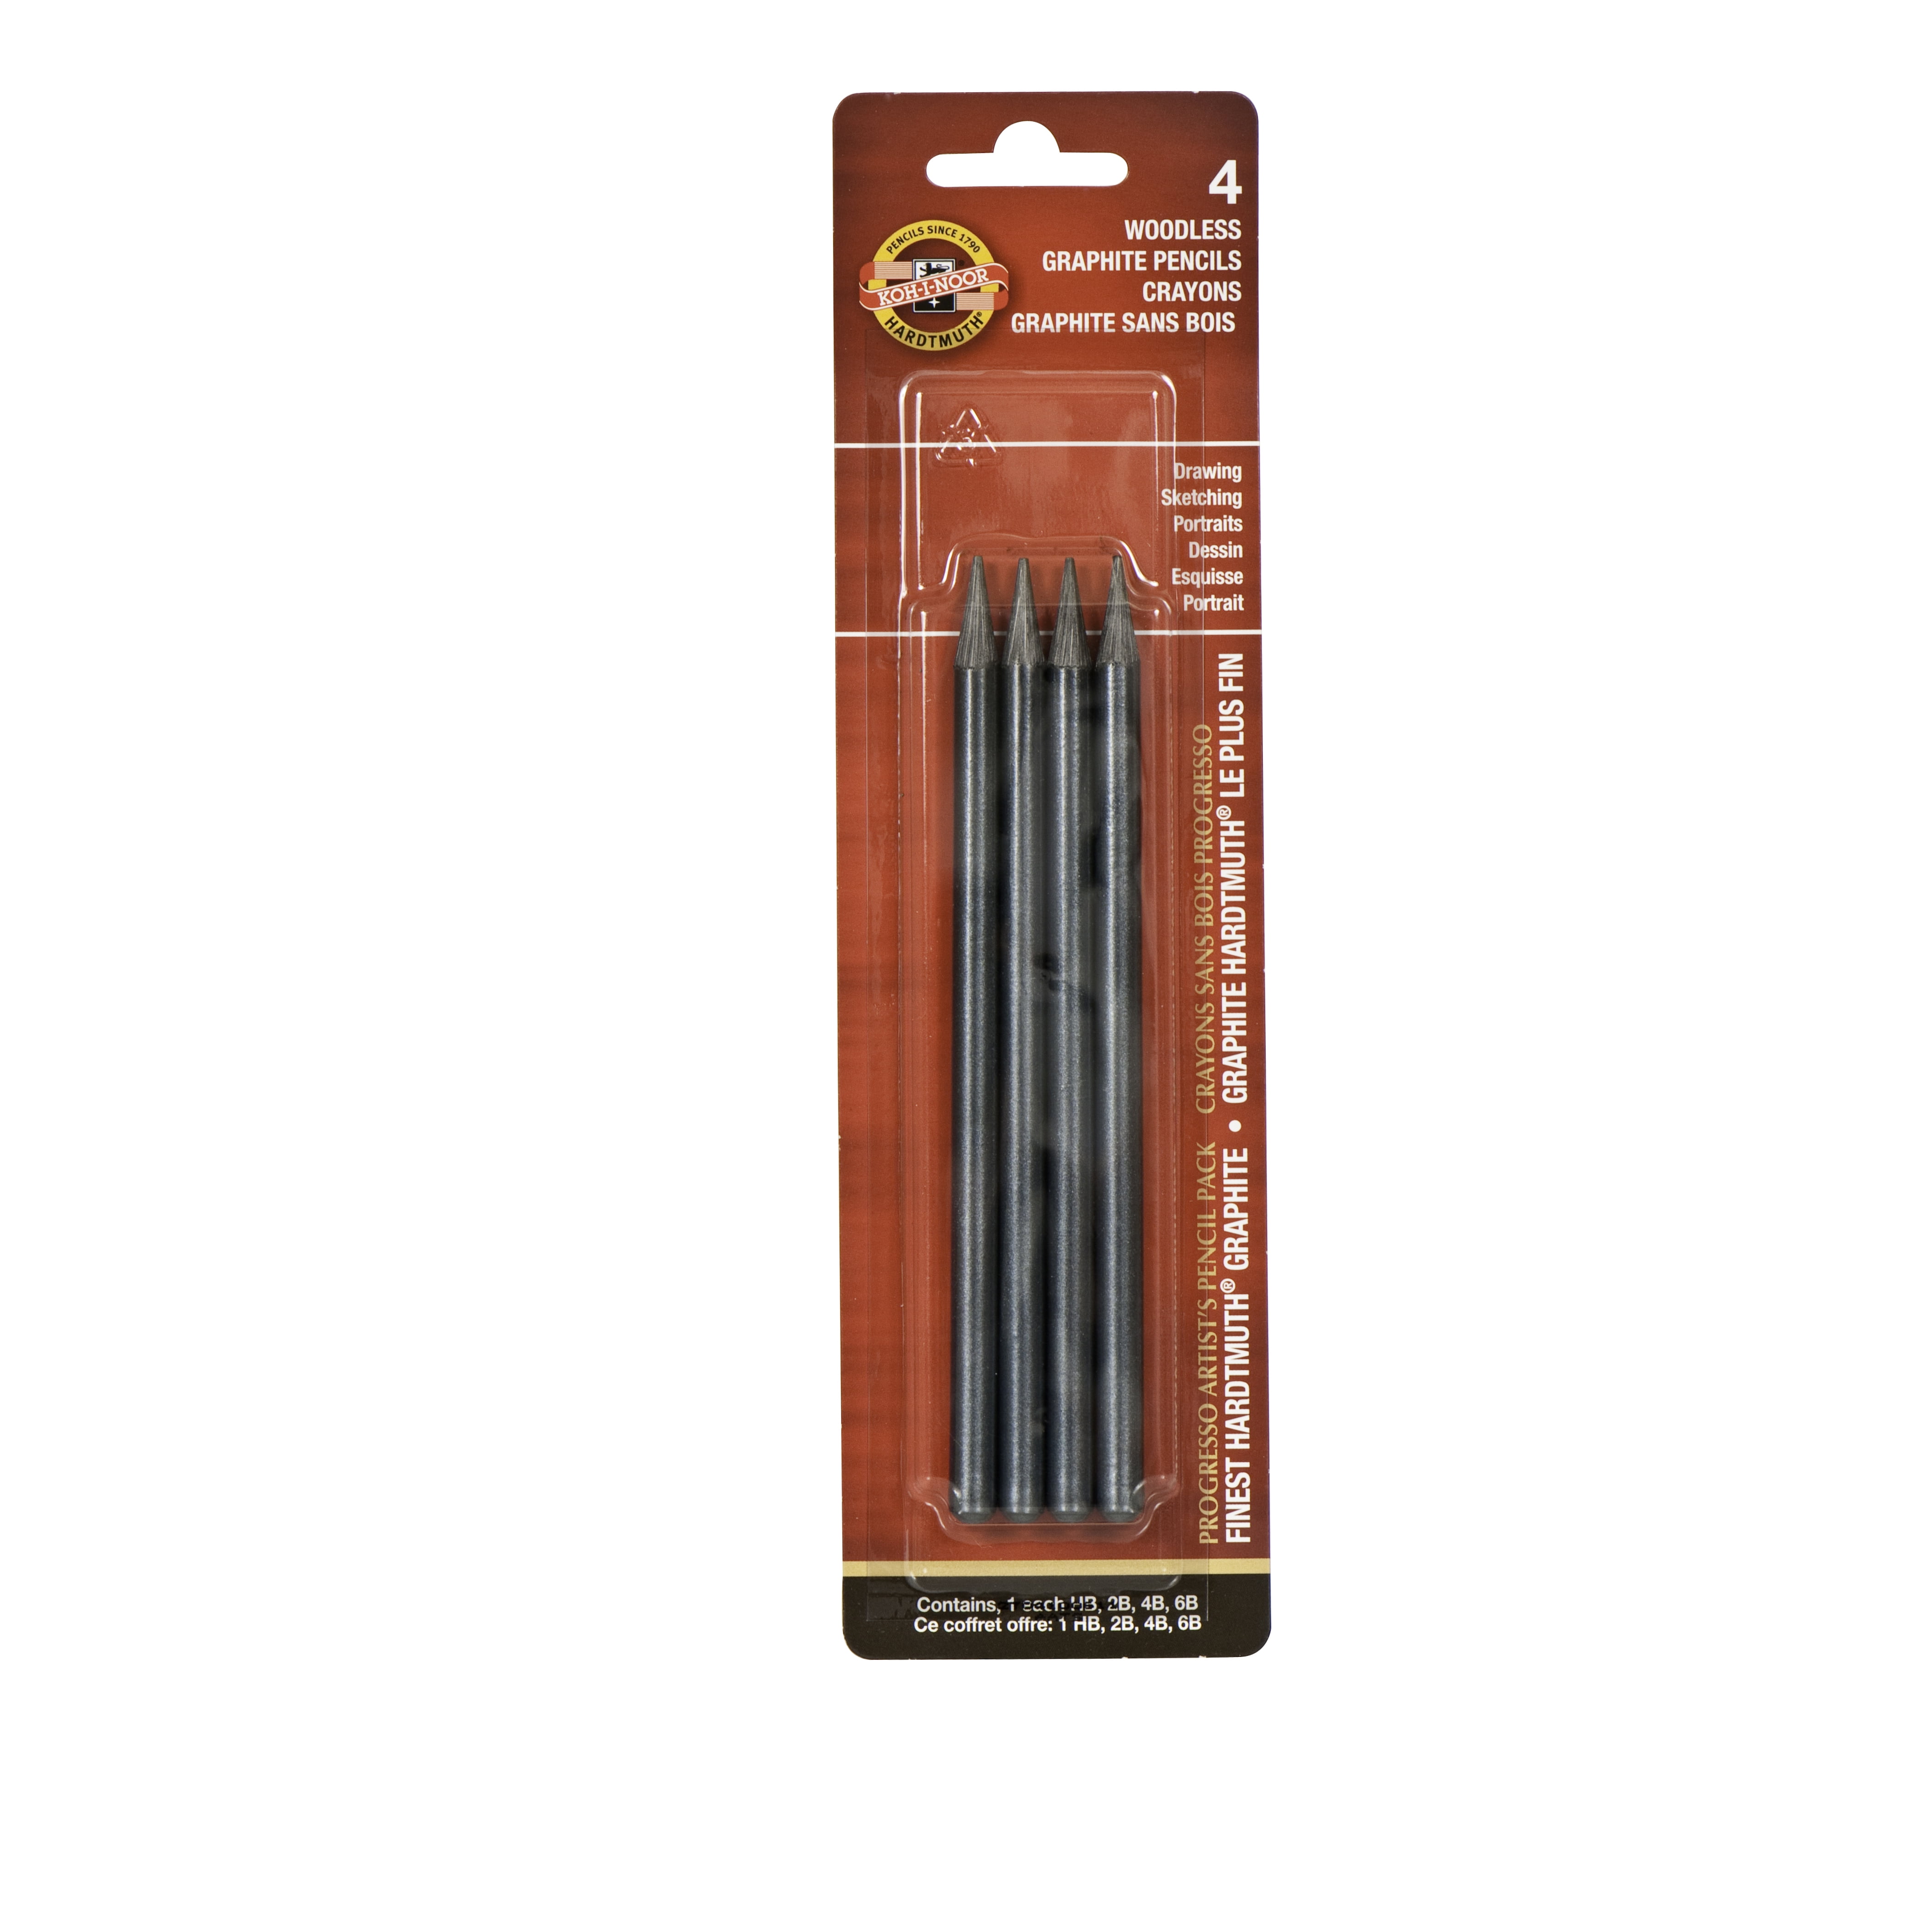 Woodless Pencil for Drawing - Koh-I-Noor Brand 